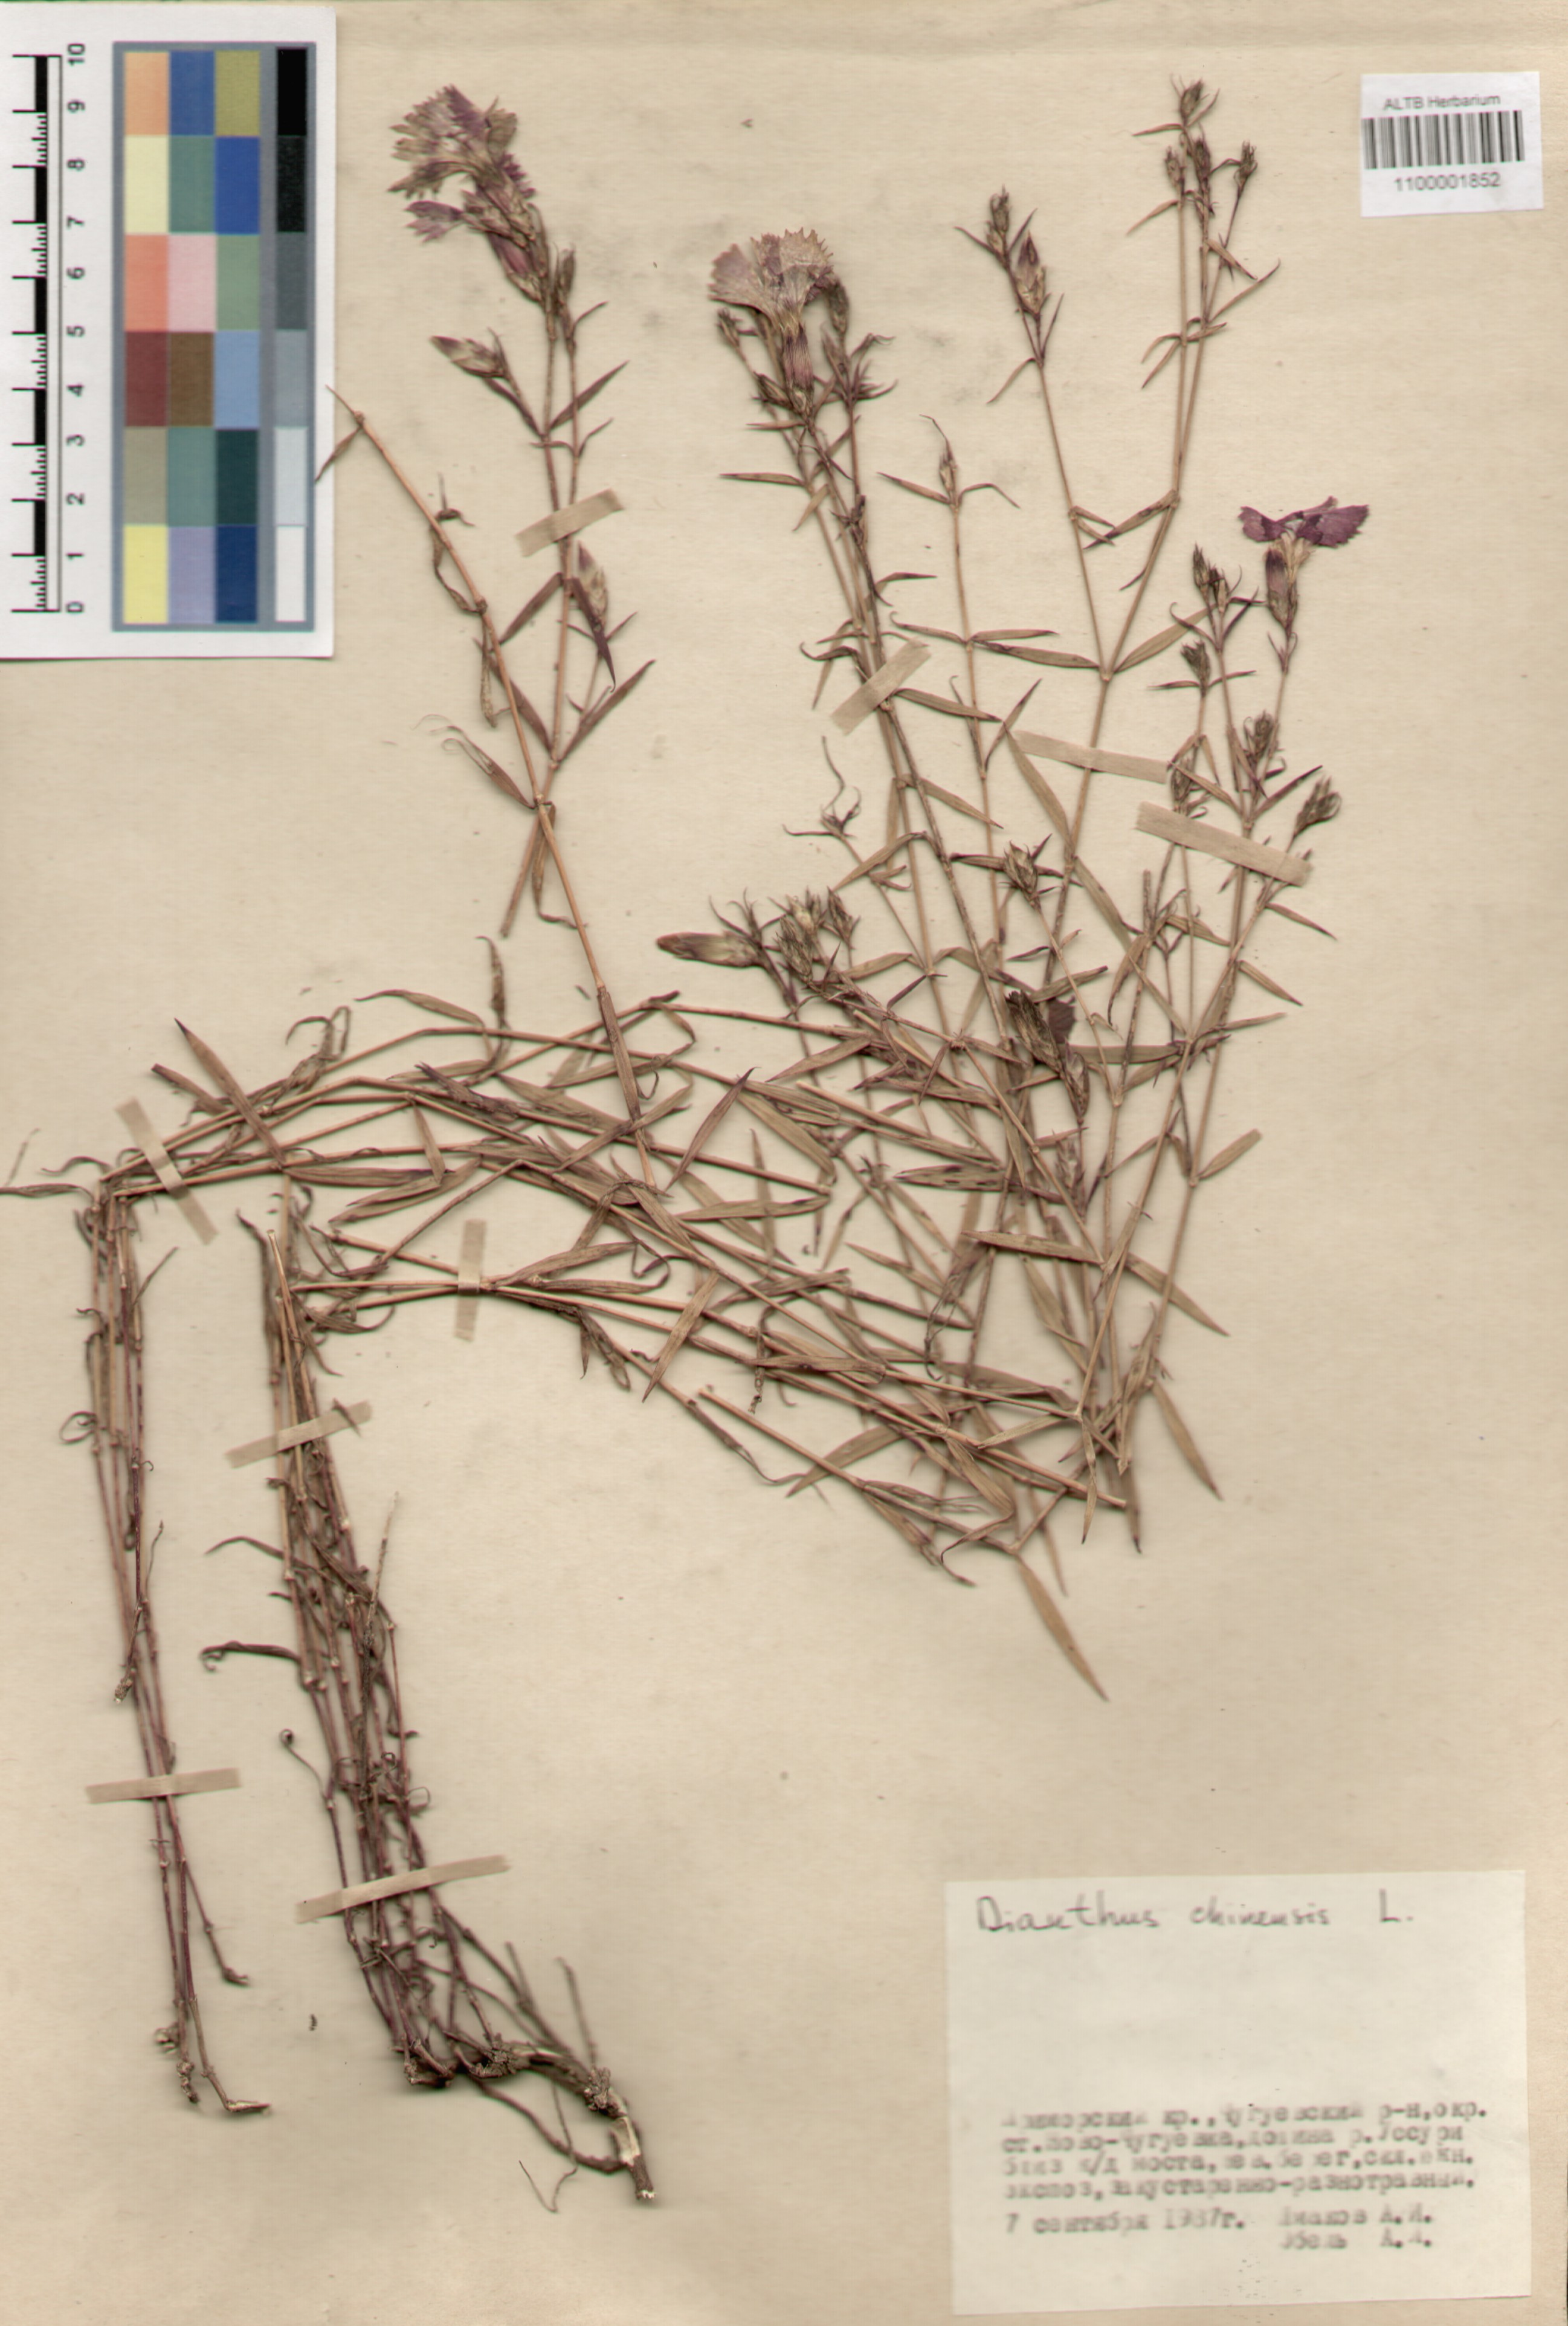 Caryophyllaceae,Dianthus chinensis L.